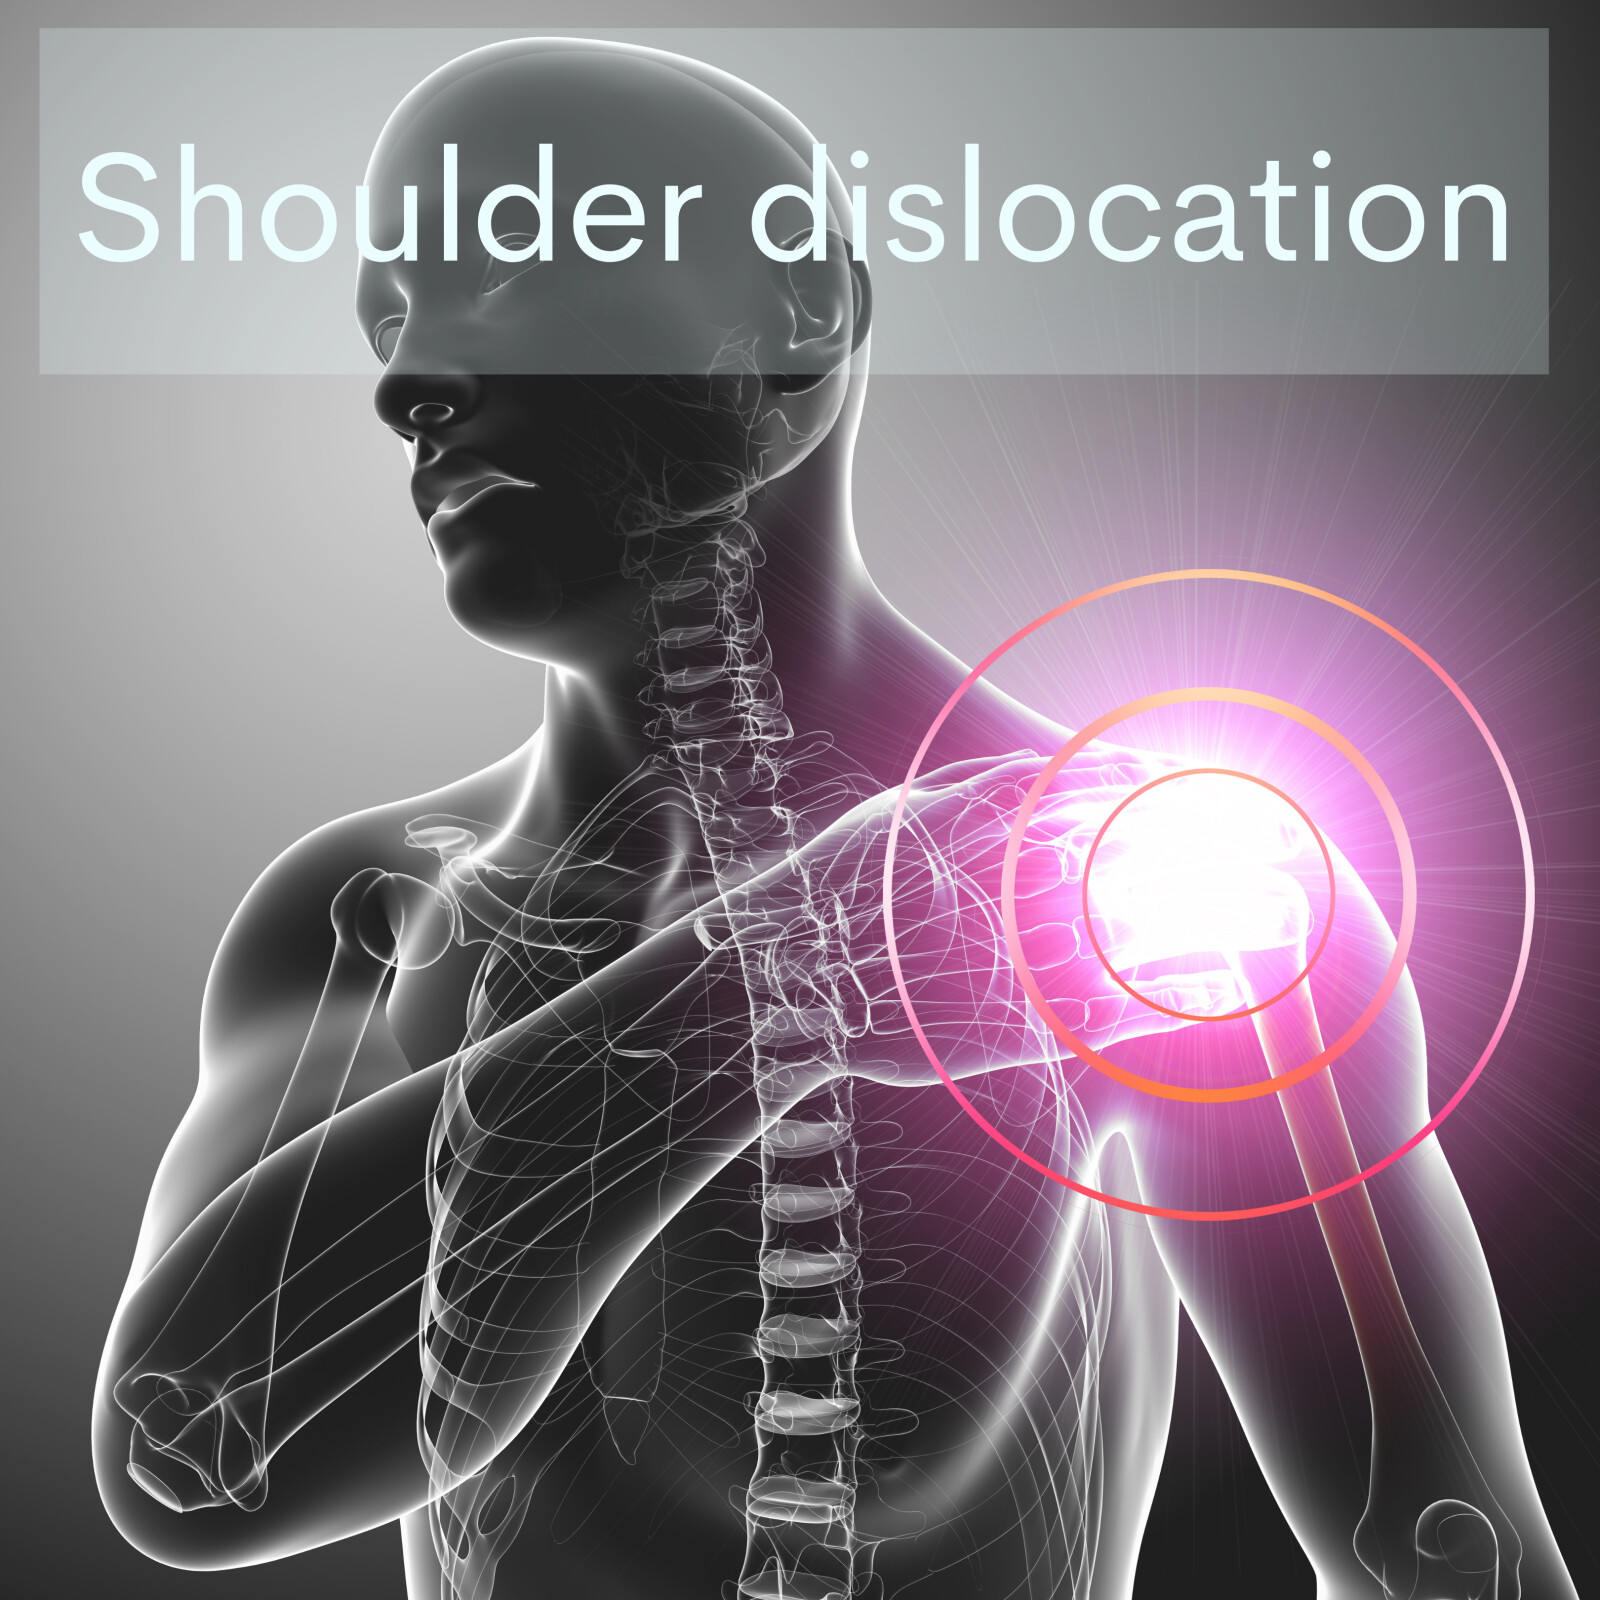 A simplified explanation of Shoulder Dislocations